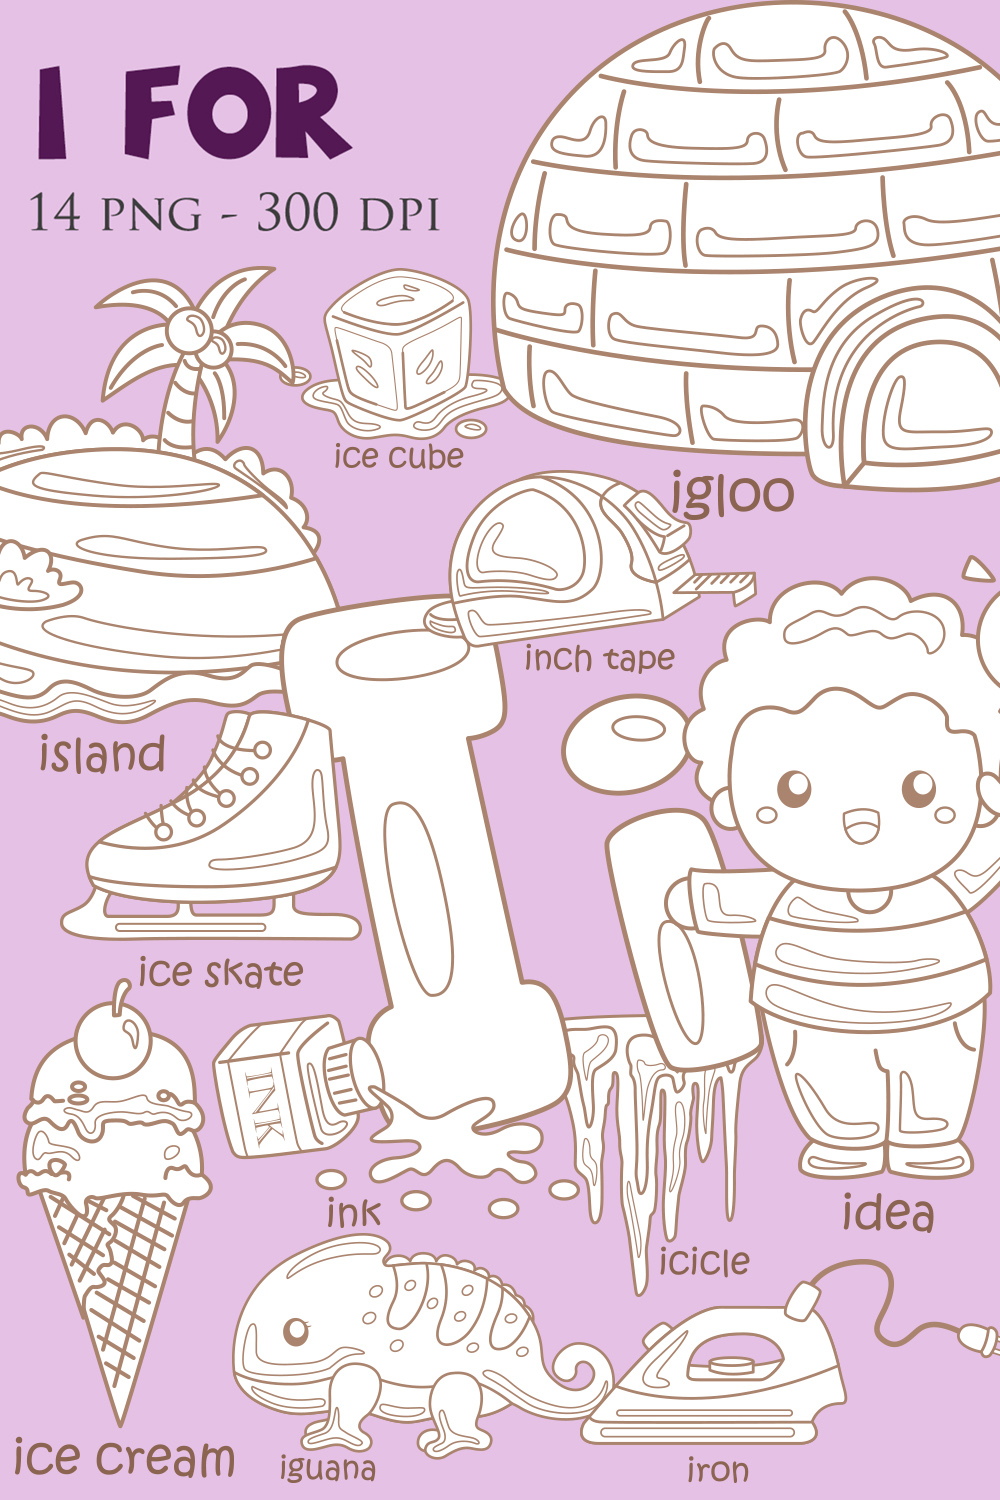 Alphabet I For Vocabulary School Letter Reading Writing Font Study Learning Student Toodler Kids Cartoon Island Inch Tape Ice Cube Ink Ice Skate Idea Iron Ice Cream Insect Igloo Ice Cream Iguana Icicle Digital Stamp Outline pinterest preview image.